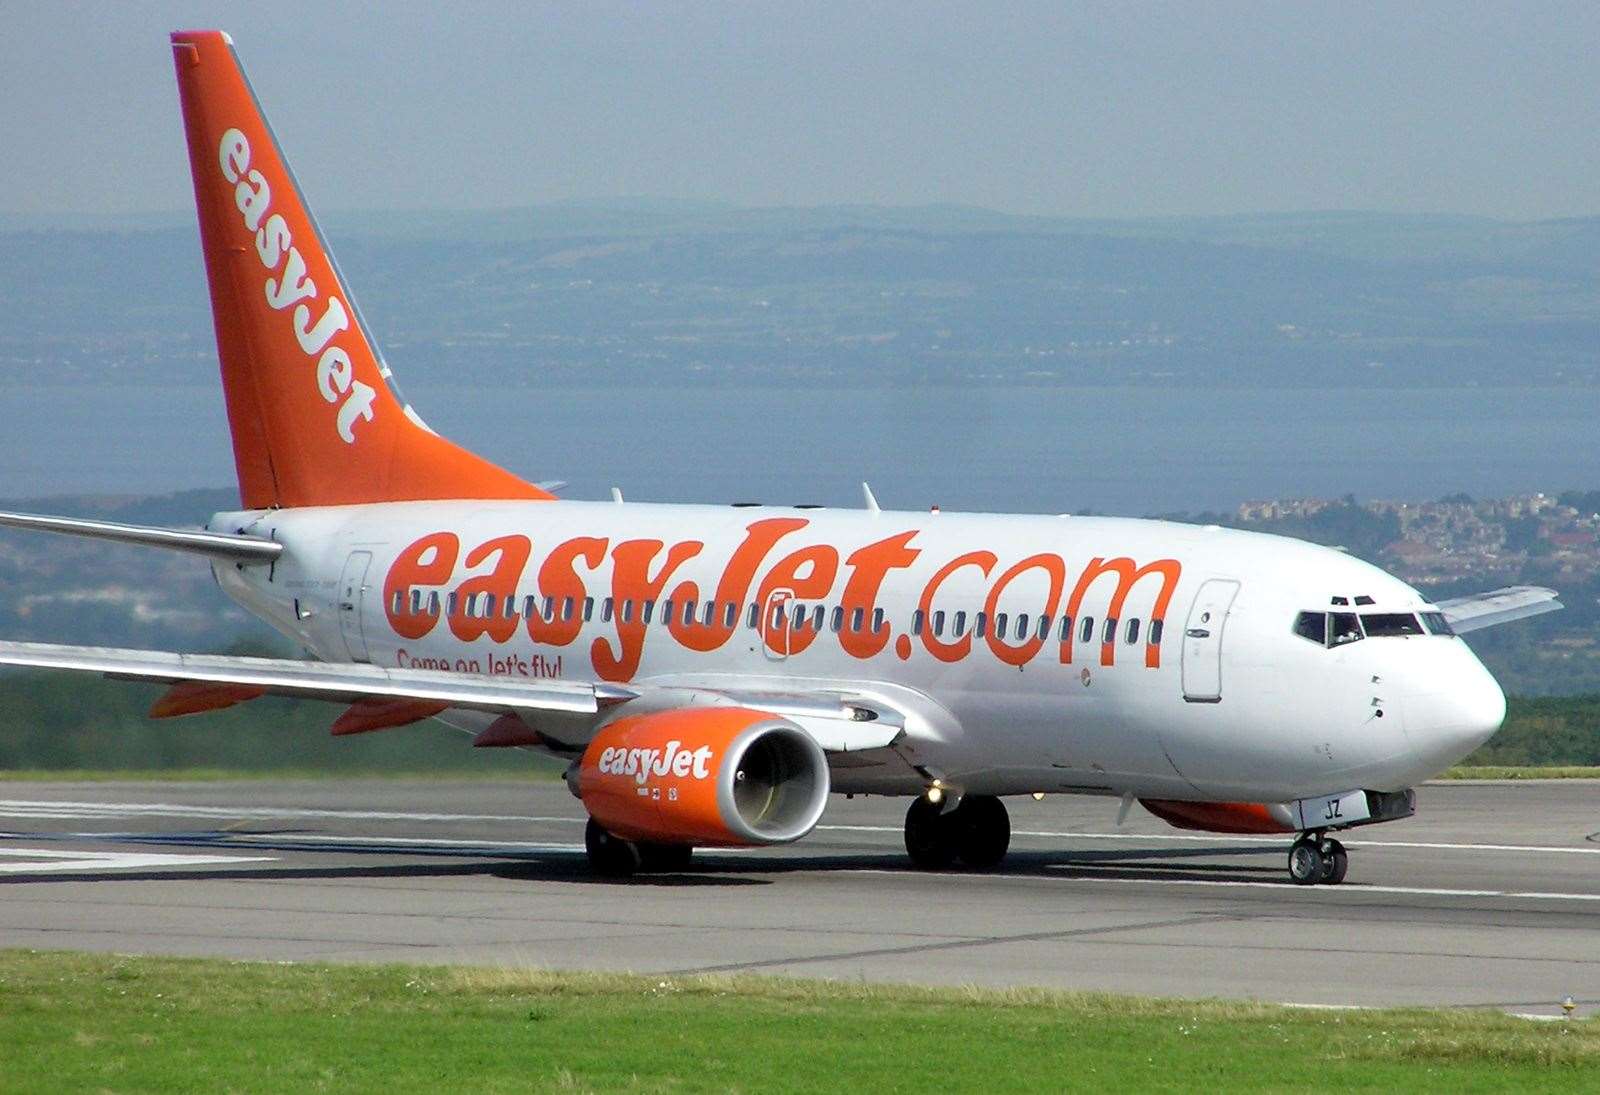 .EasyJet has announced plans to reintroduce flights from next month.